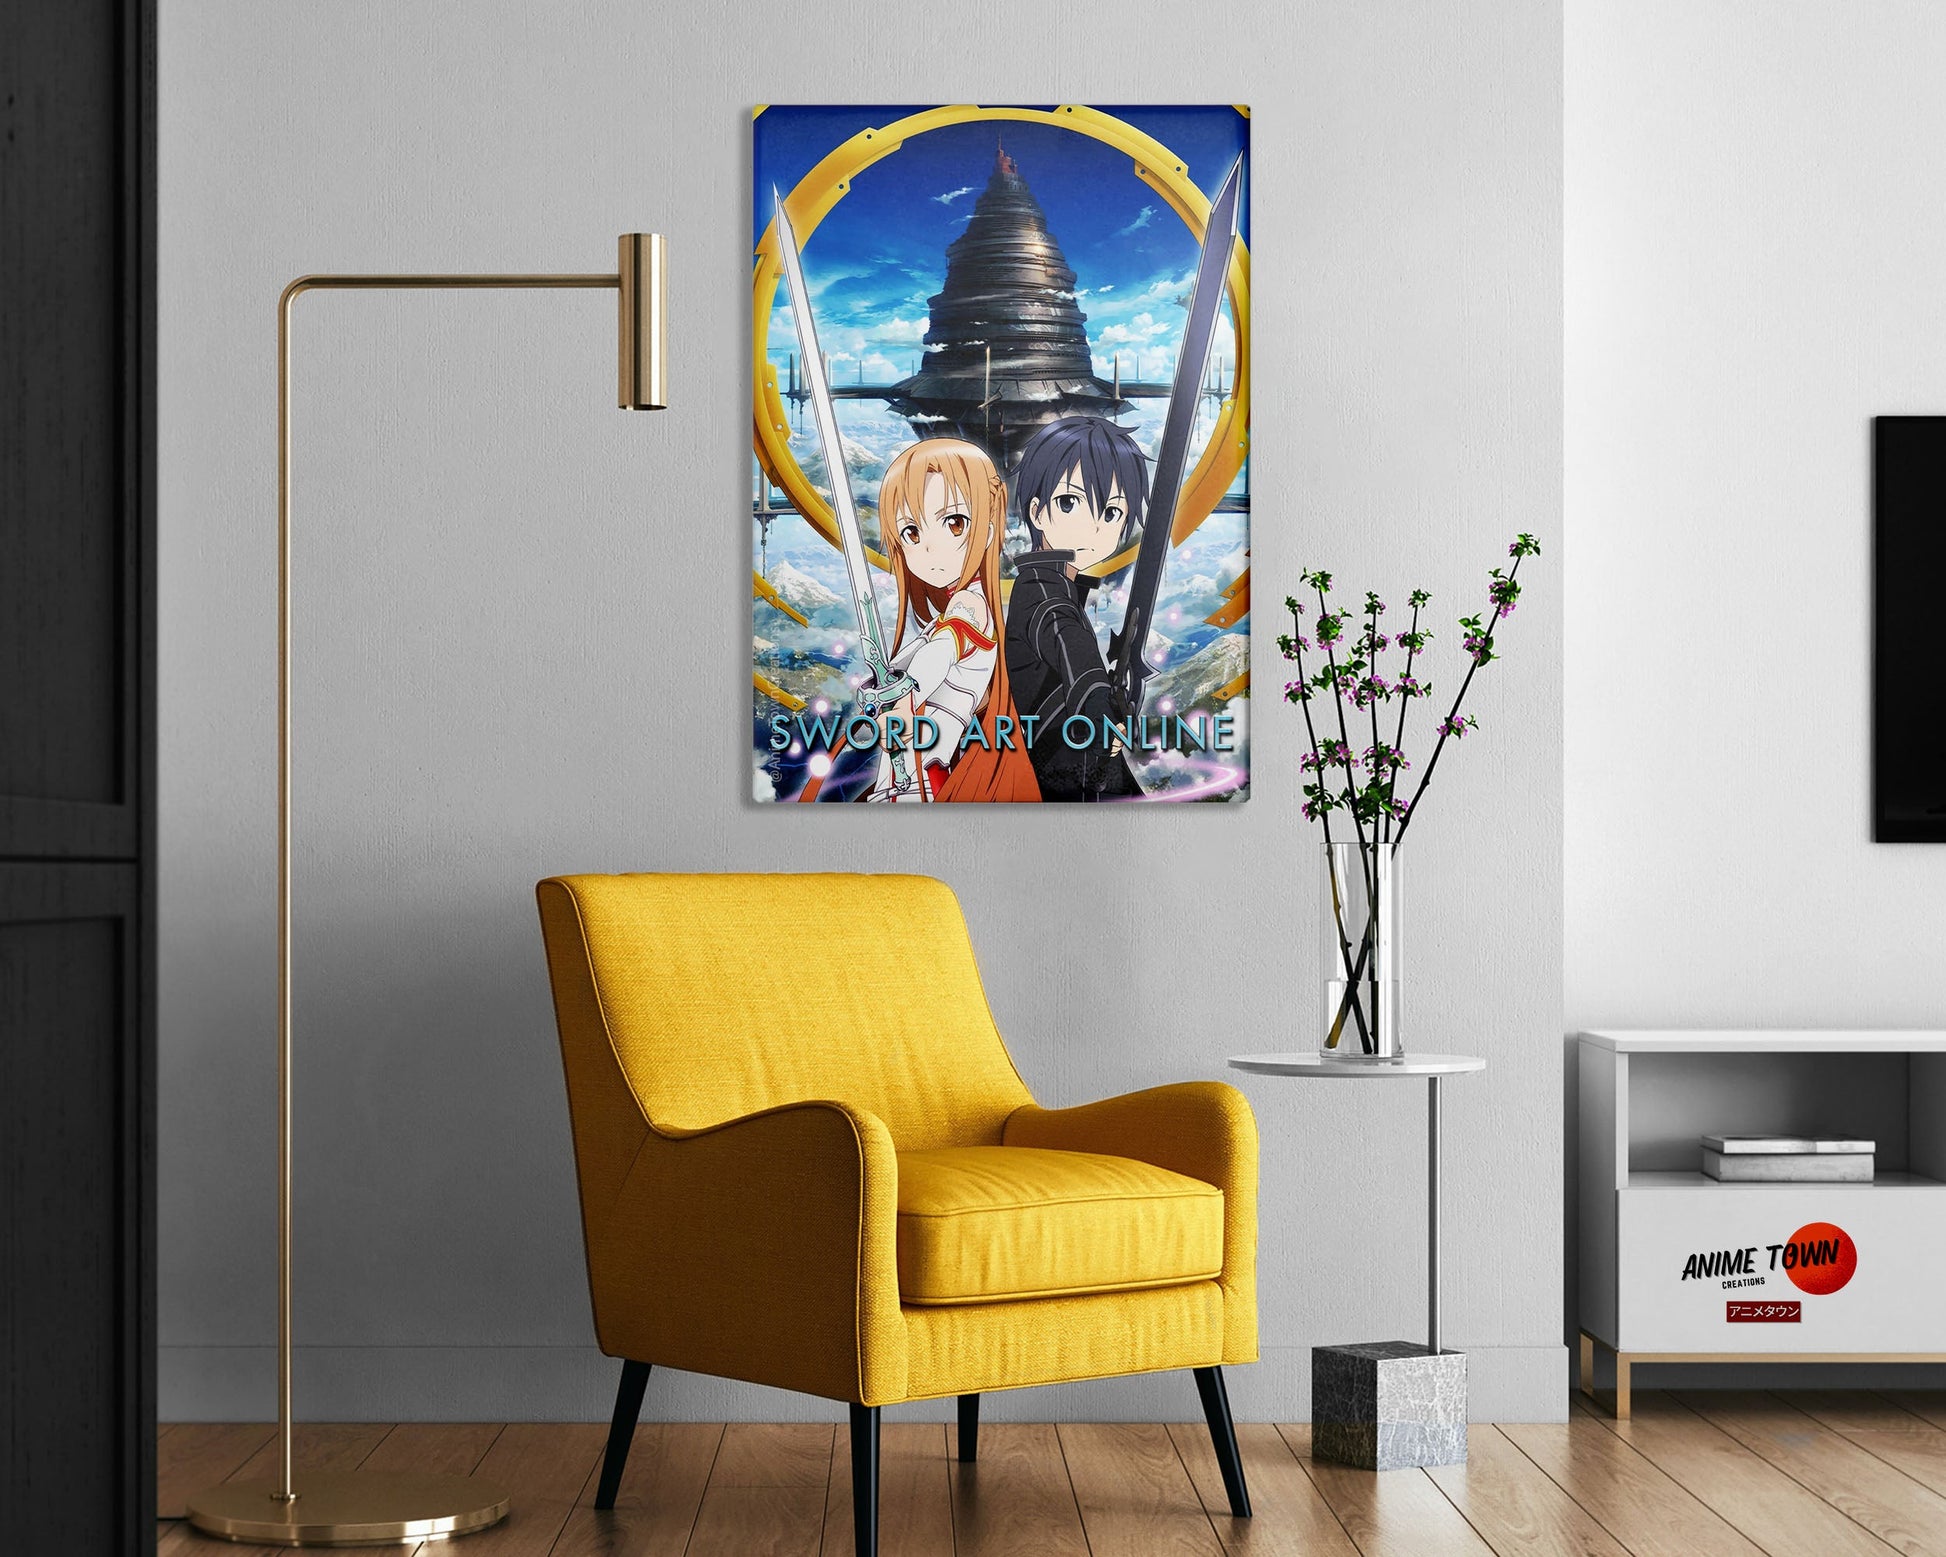 Anime Town Creations Metal Poster Sword Art Online 16" x 24" Home Goods - Anime Spy x Family Metal Poster